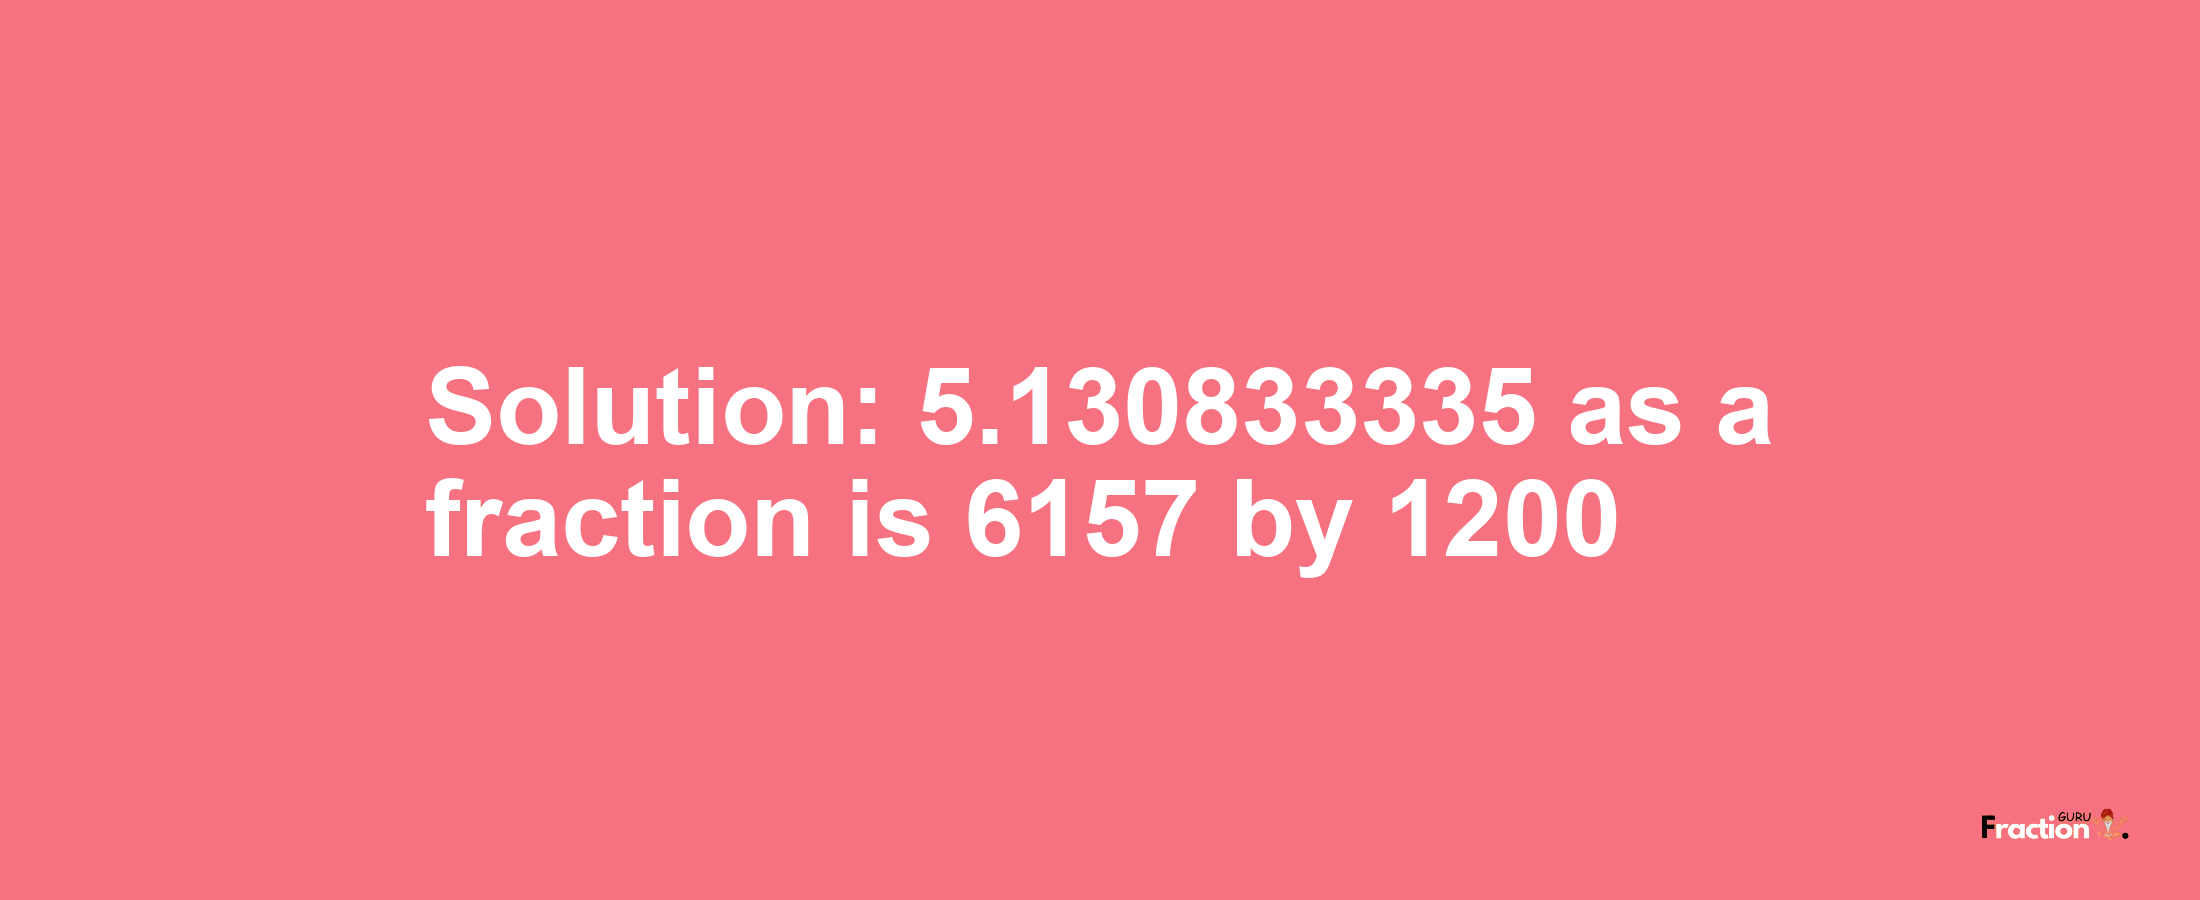 Solution:5.130833335 as a fraction is 6157/1200